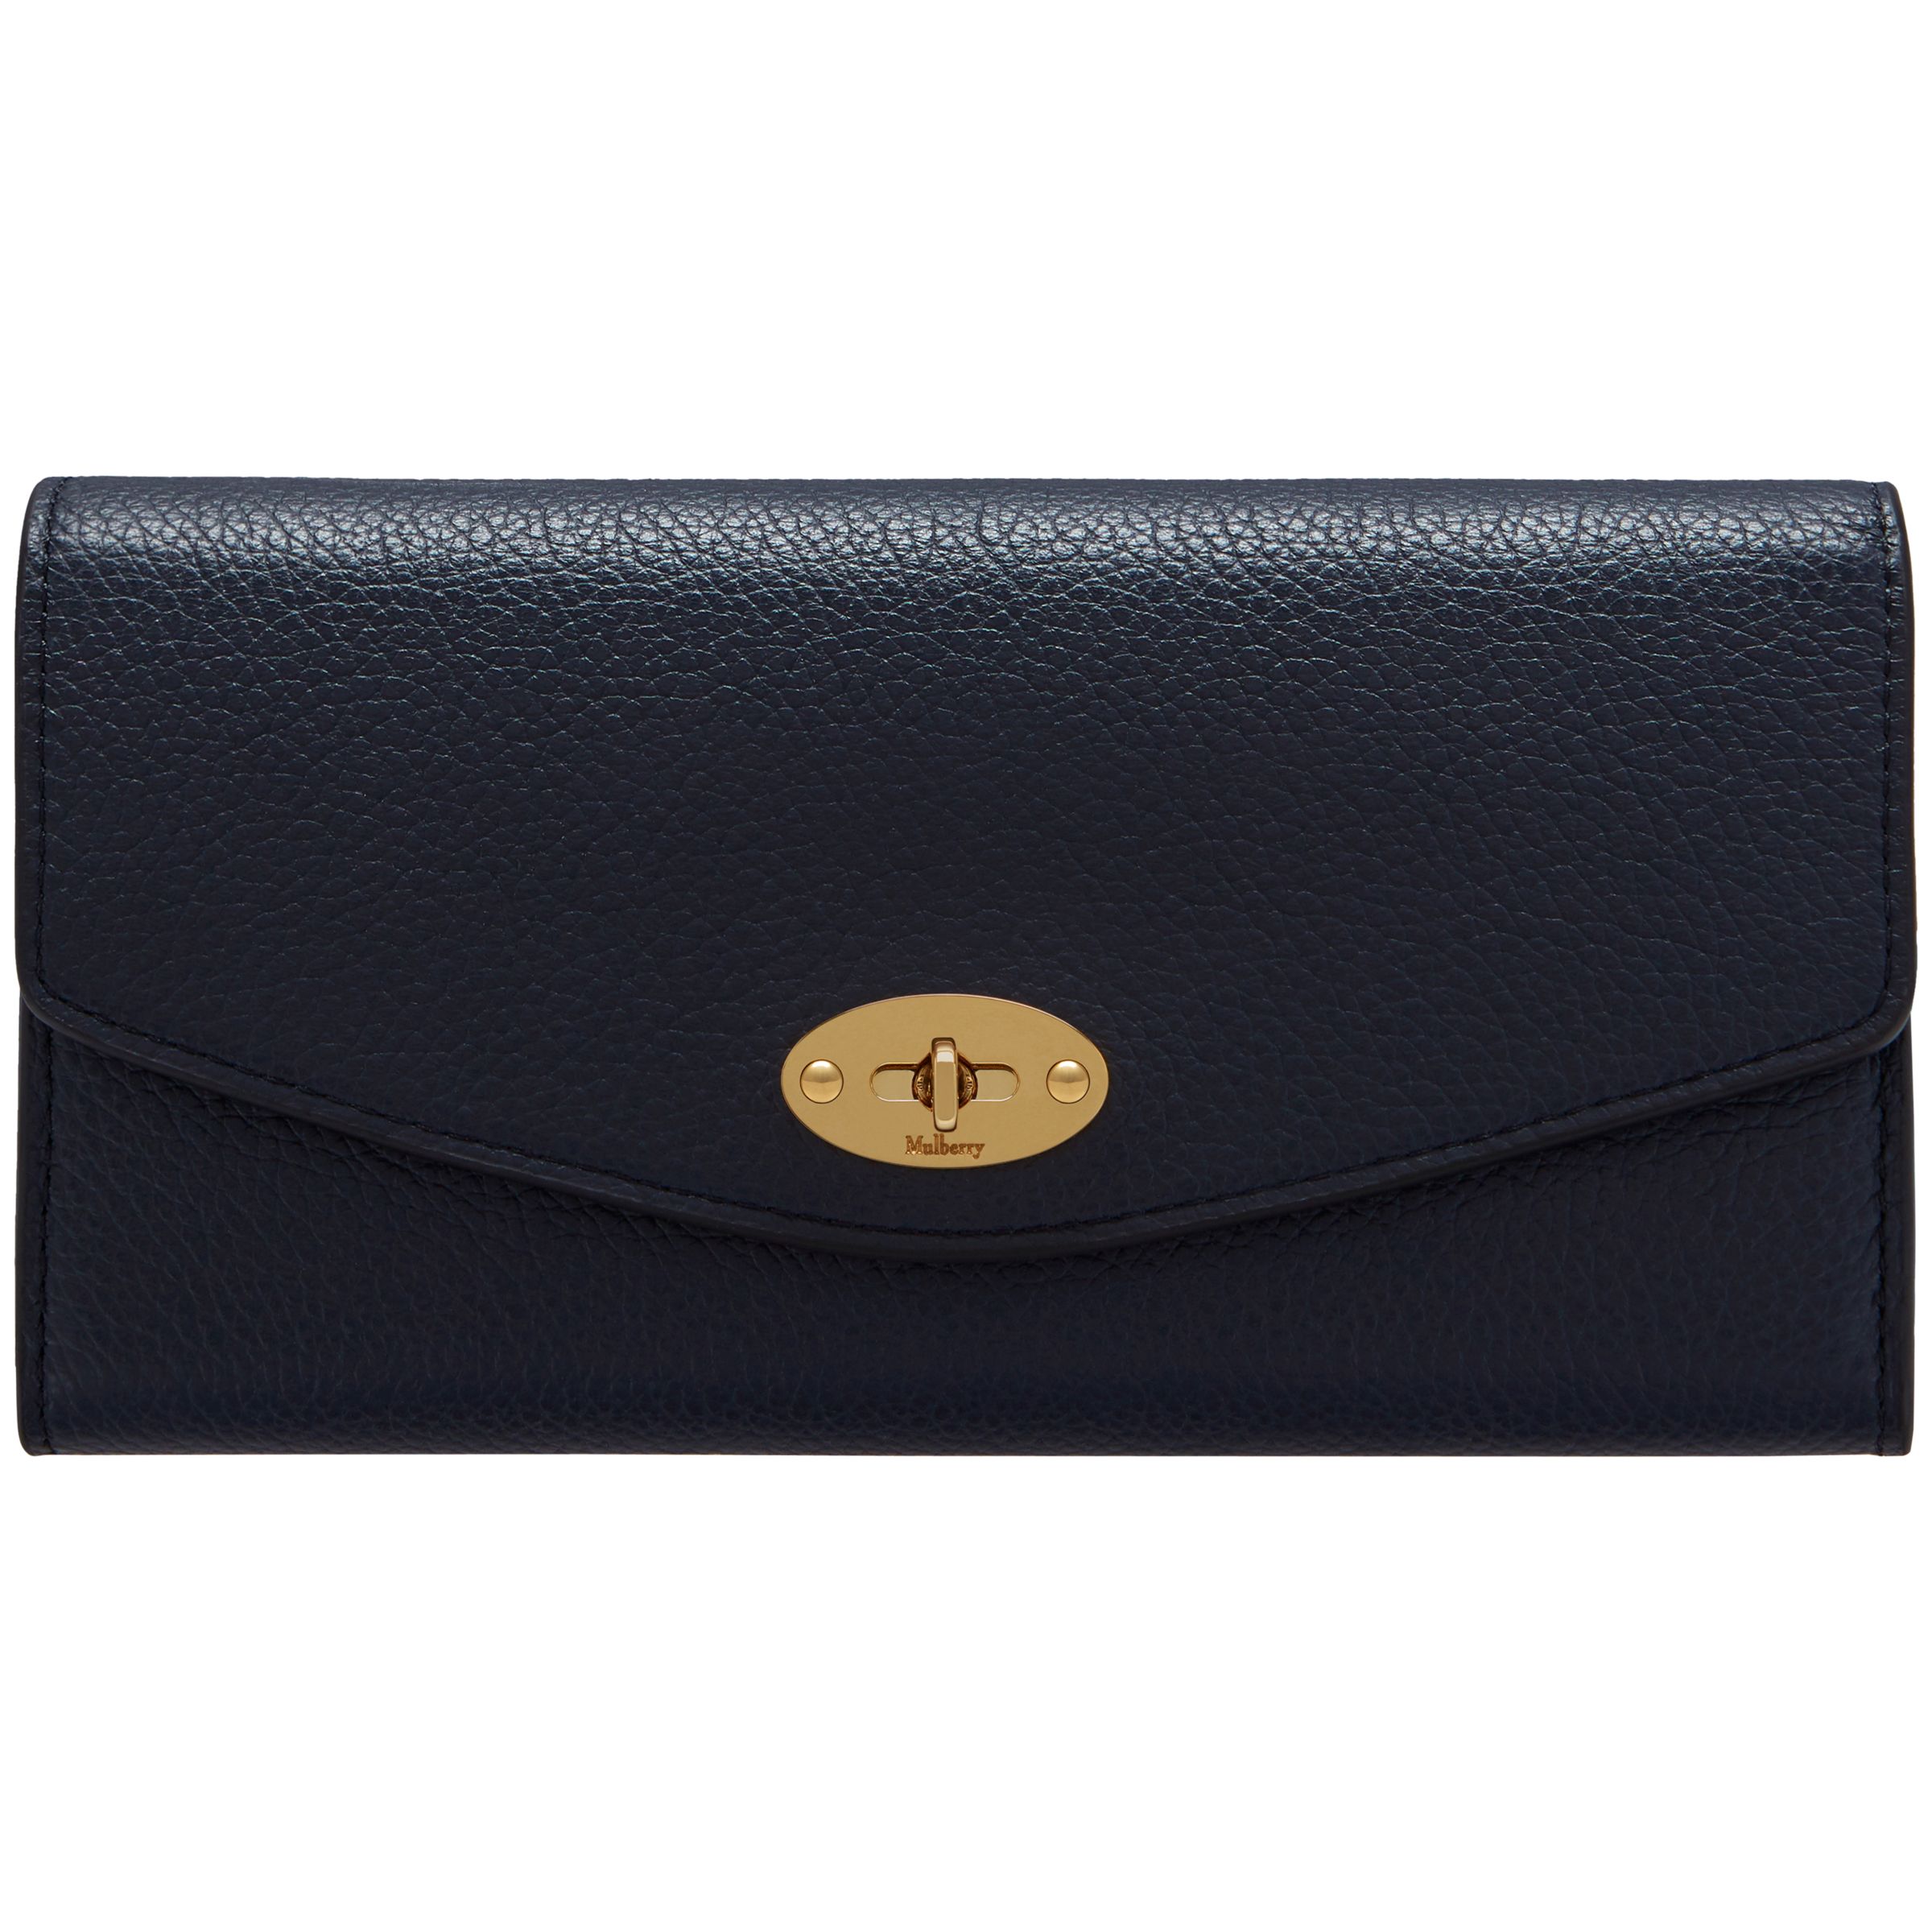 Mulberry Darley Small Classic Grain Leather Medium Wallet